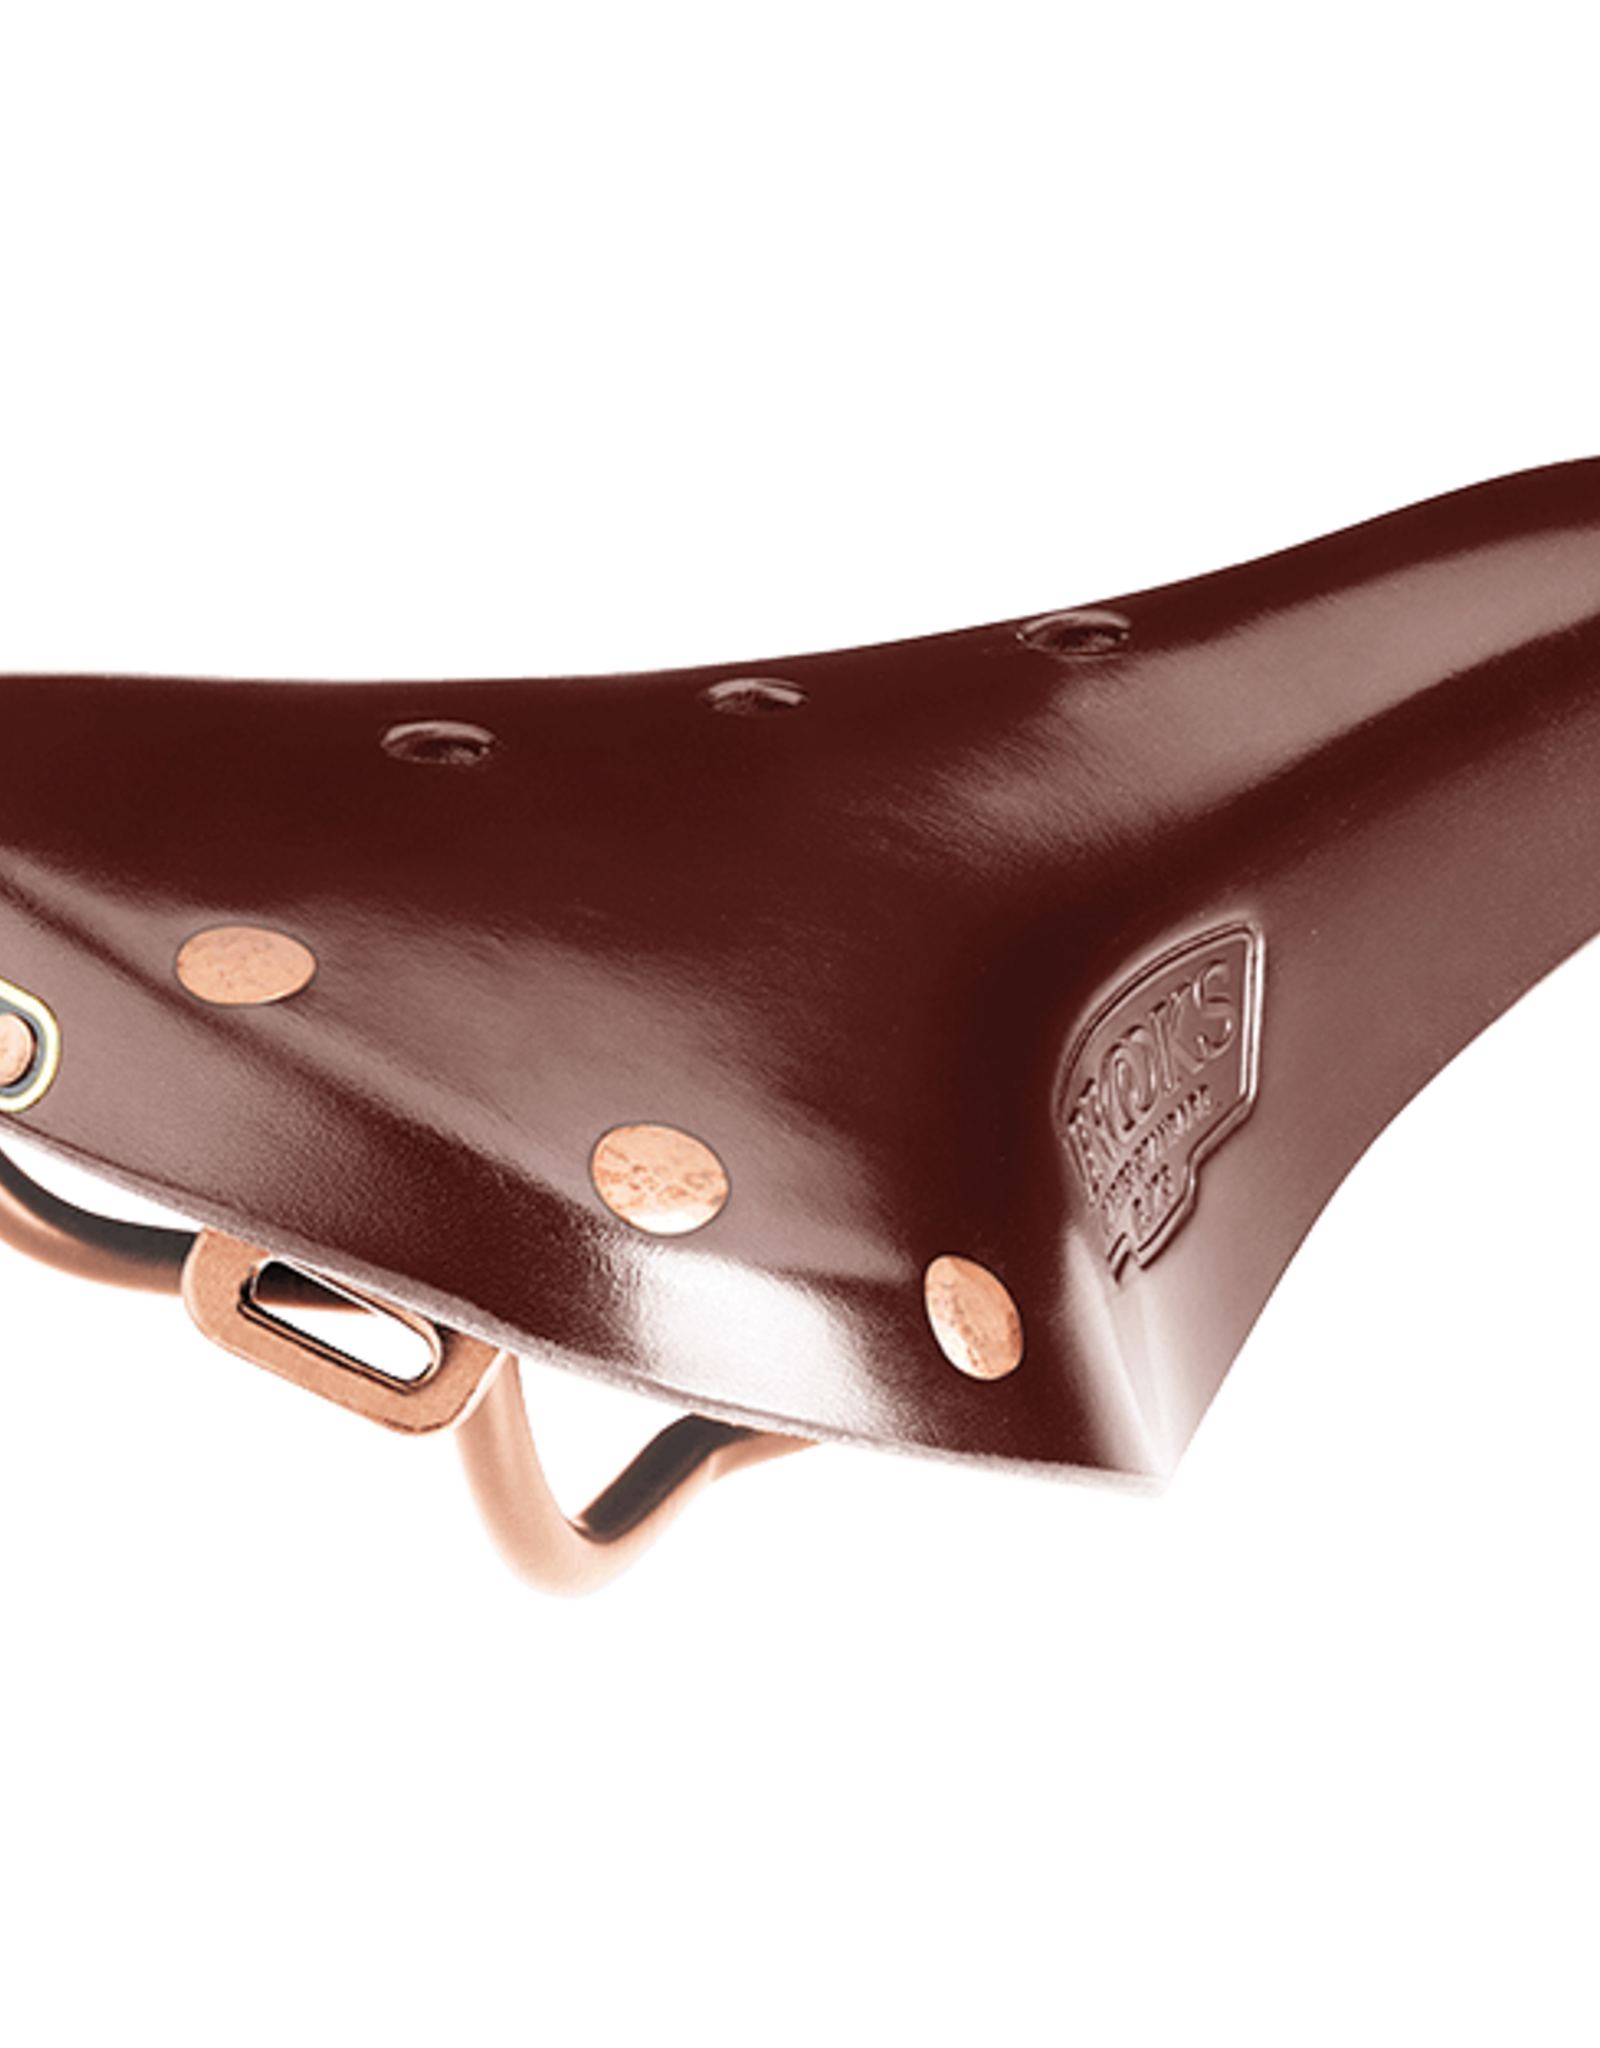 Brooks - B17 Saddle Special Short - The 